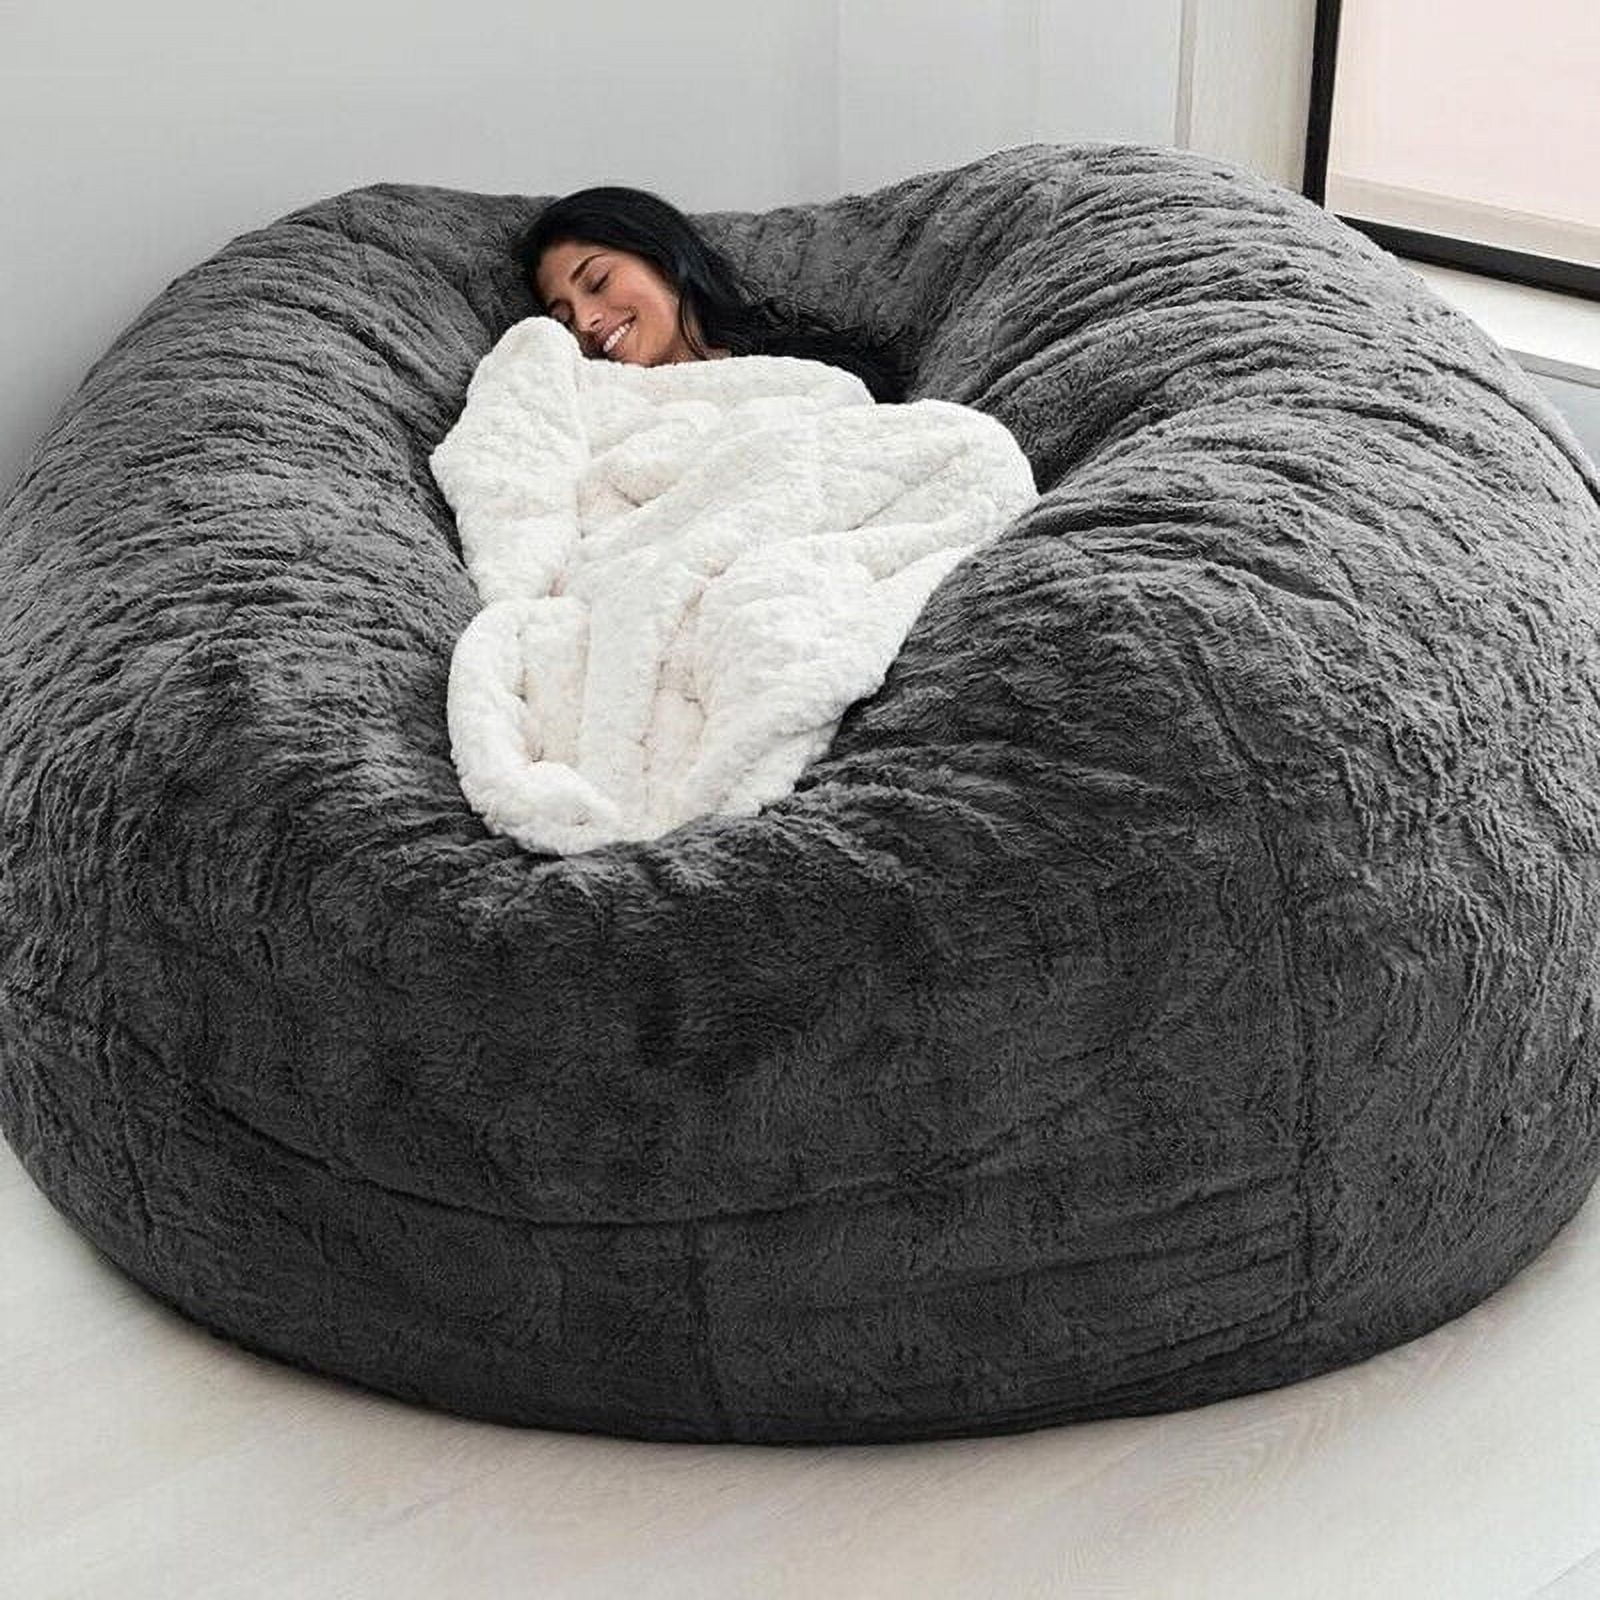 New Extra Large Bean Bag Chairs Couch Sofa Cover Indoor Lazy Lounger For  Adults Kids Sellwell (does Not Include Filler)